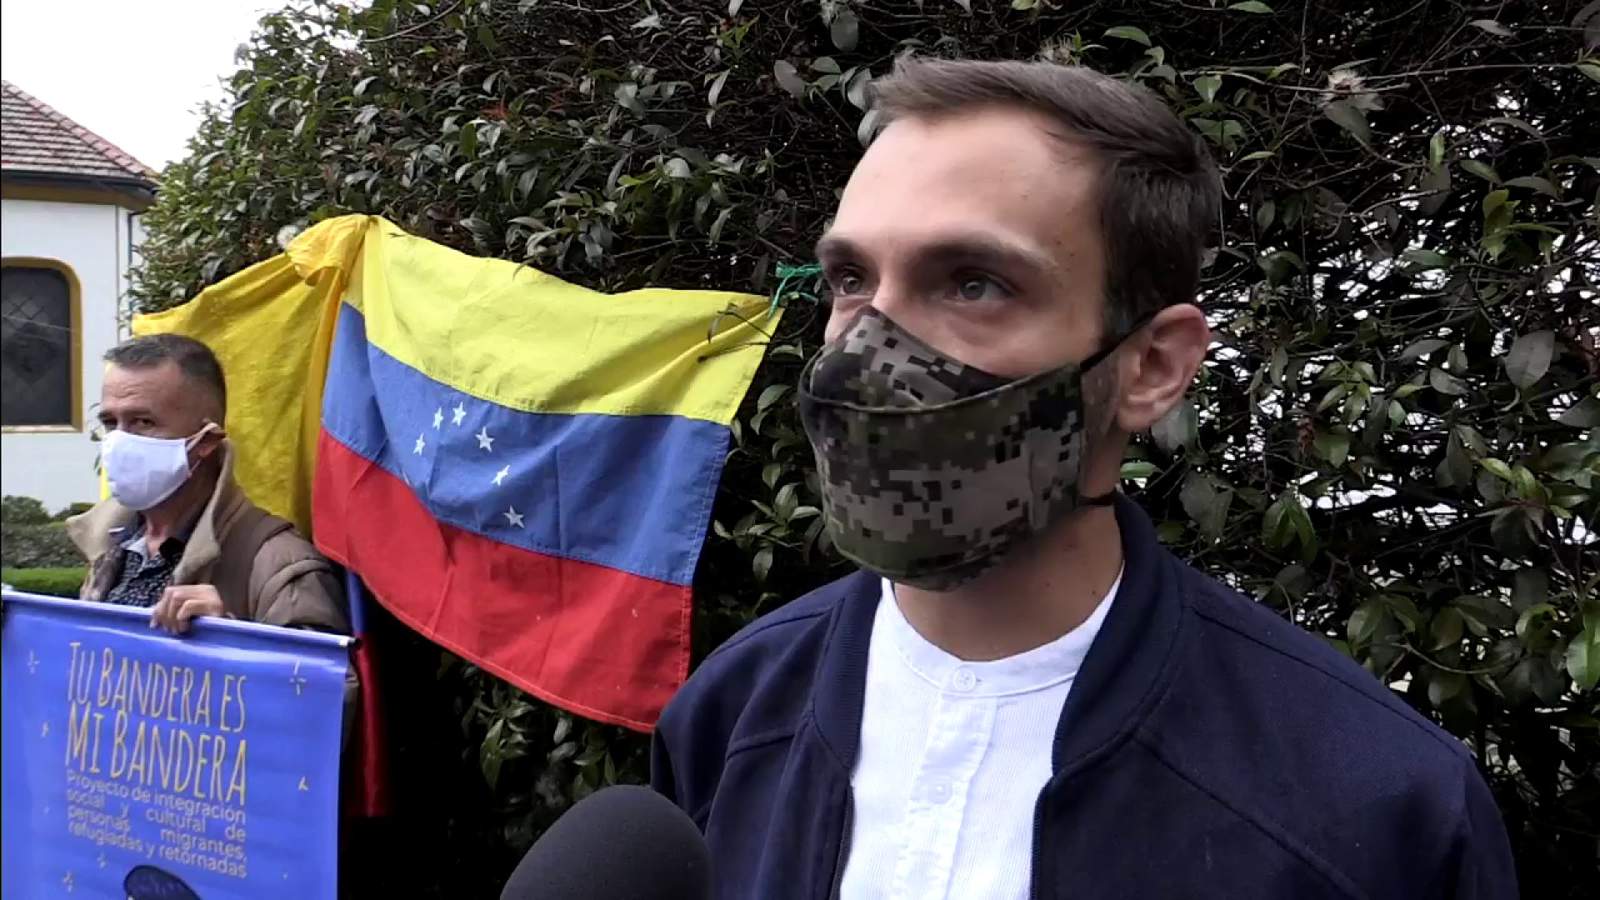 Colombian activists stand against xenophobia after mayor’s response to crime involving Venezuelans